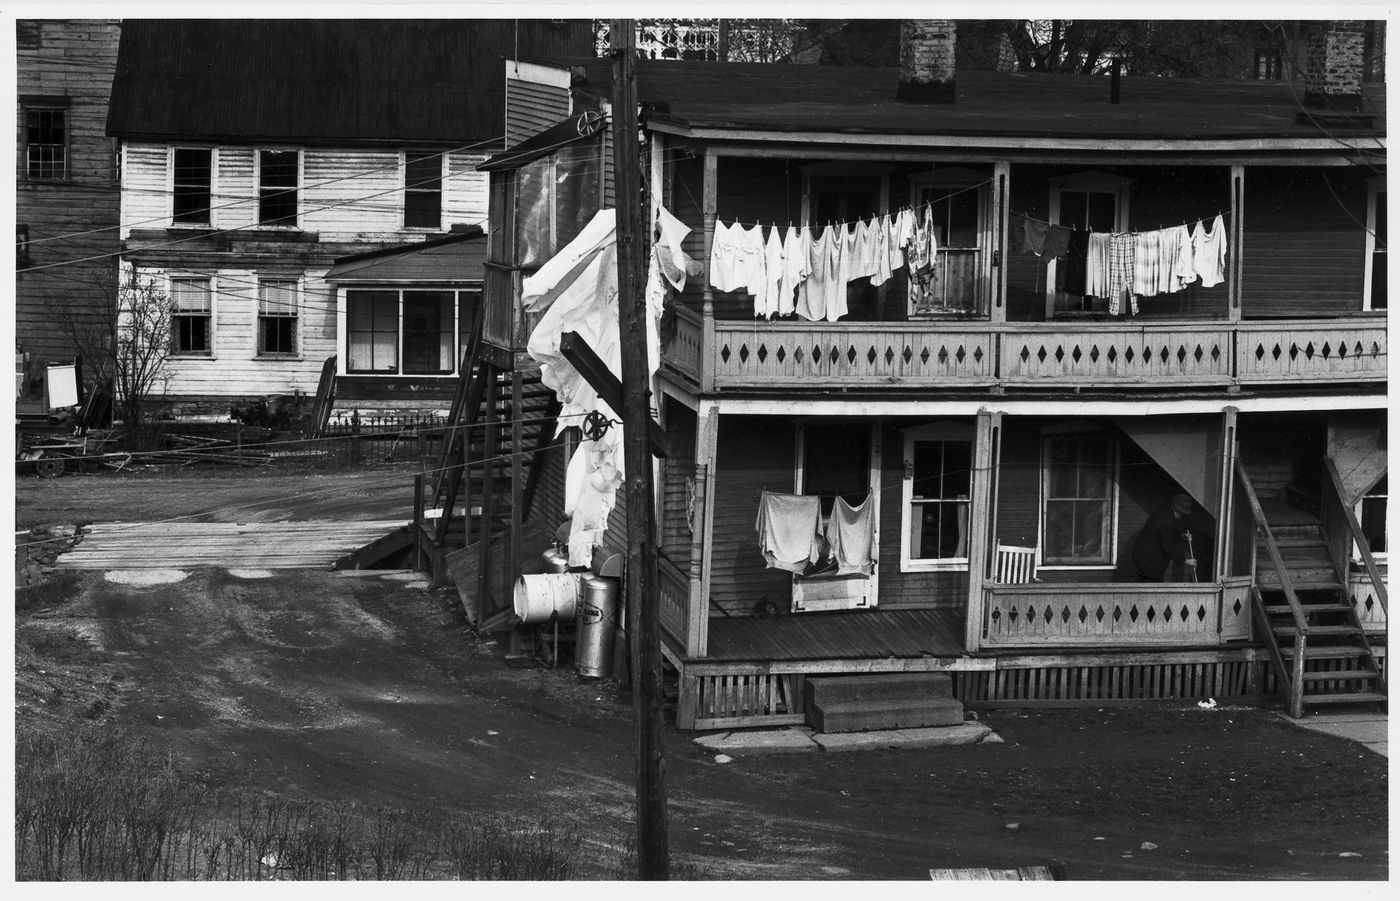 View of the rear façade of a house showing clothes hung on a clothes line with another house in the background, New Jersey